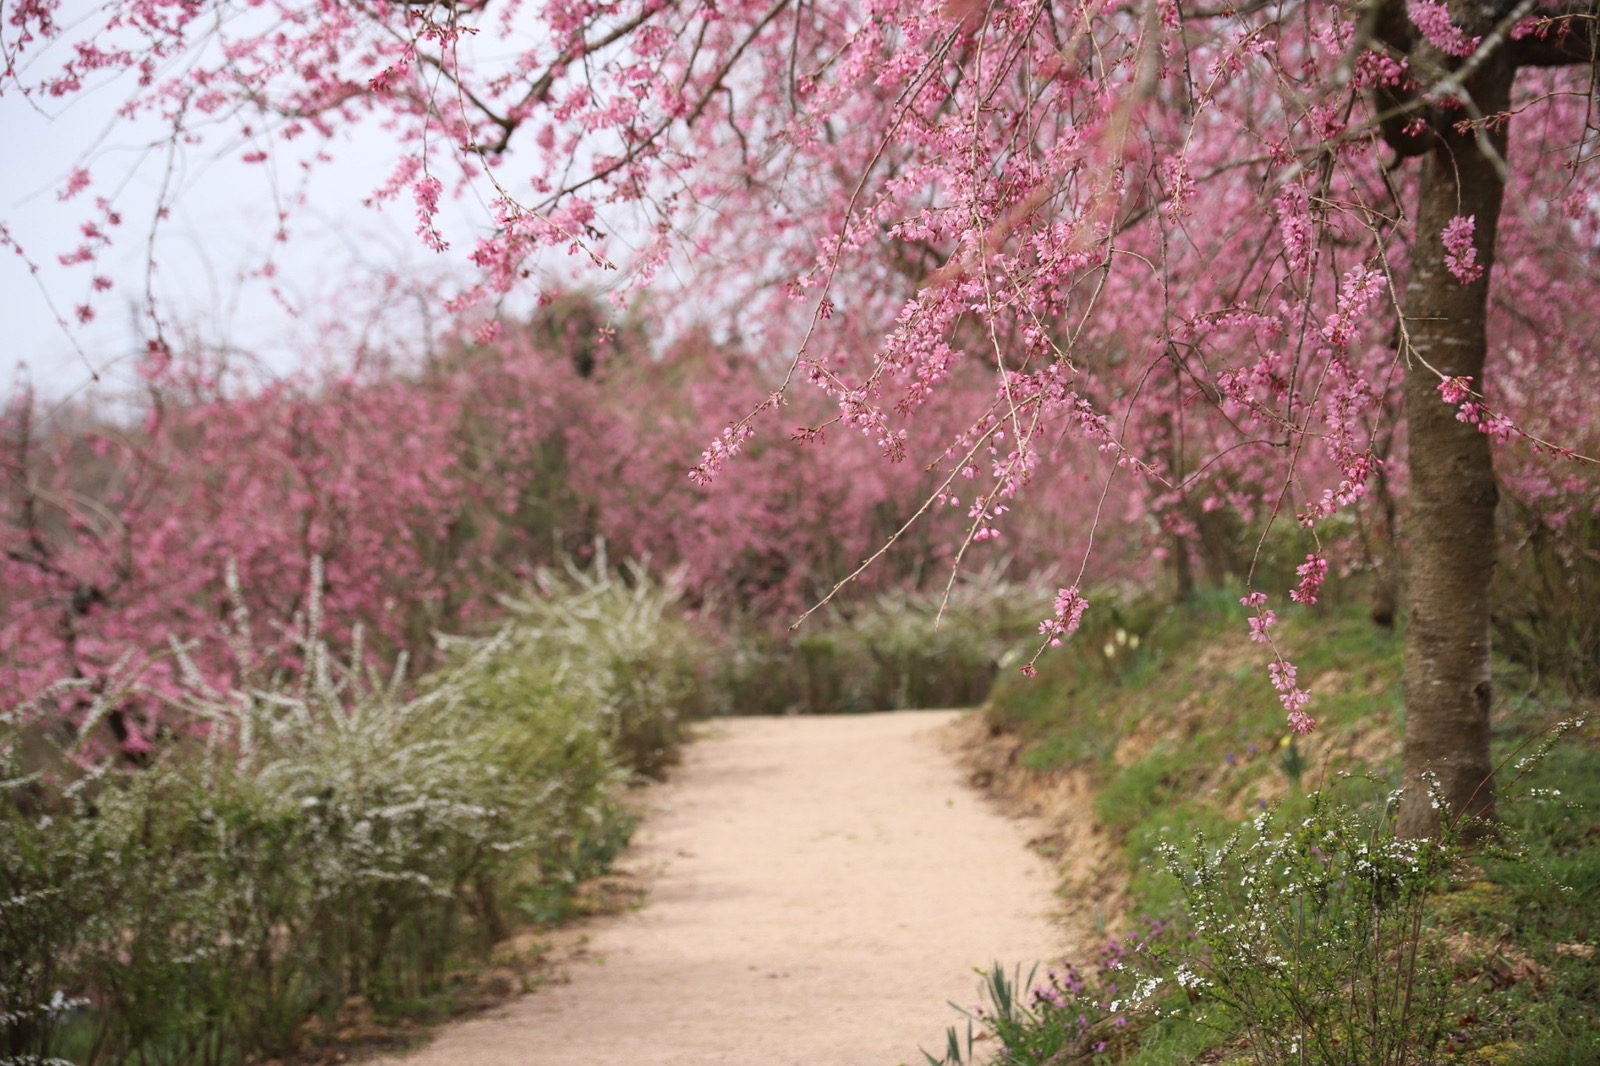 【Park open】Weeping cherry blossom【60% flowering】Rape blossoms【70% flowering】Thunberg spiraea【Best time for viewing】